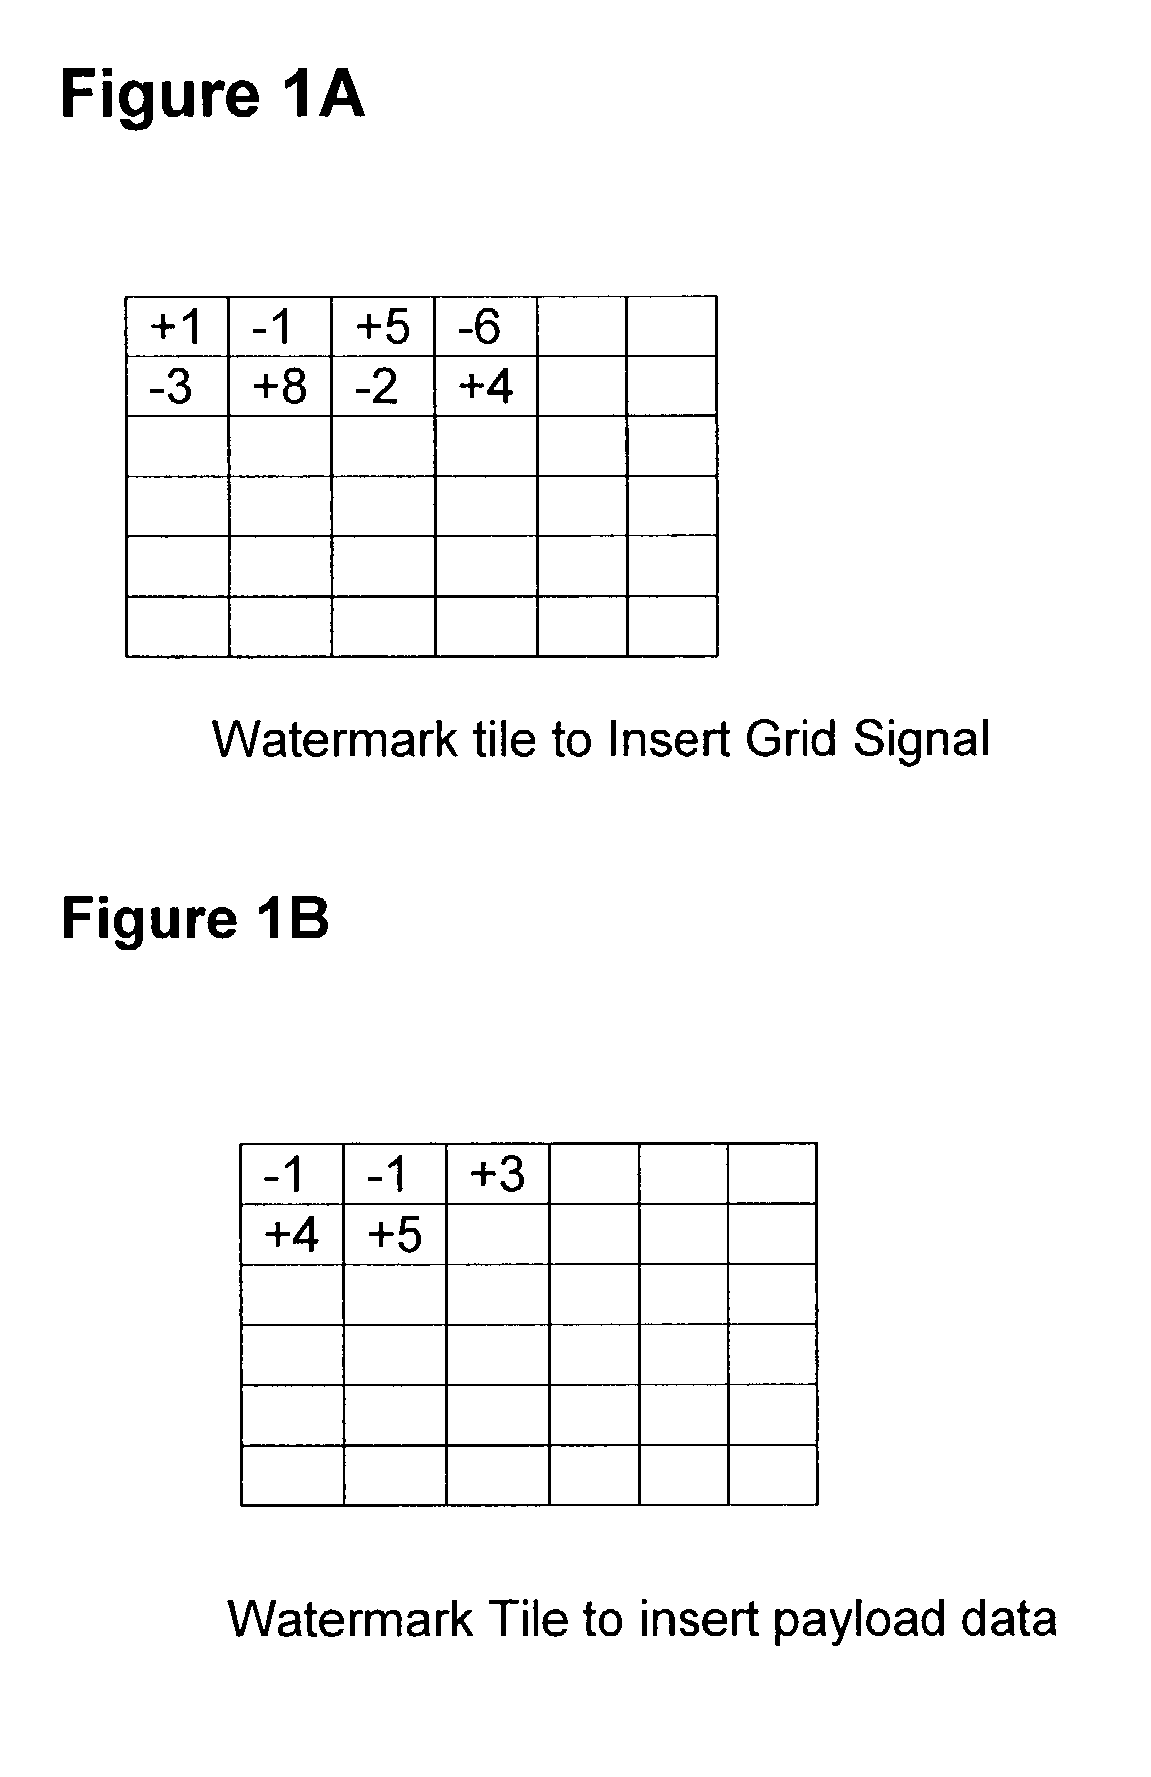 Watermarking with separate application of the grid and payload signals